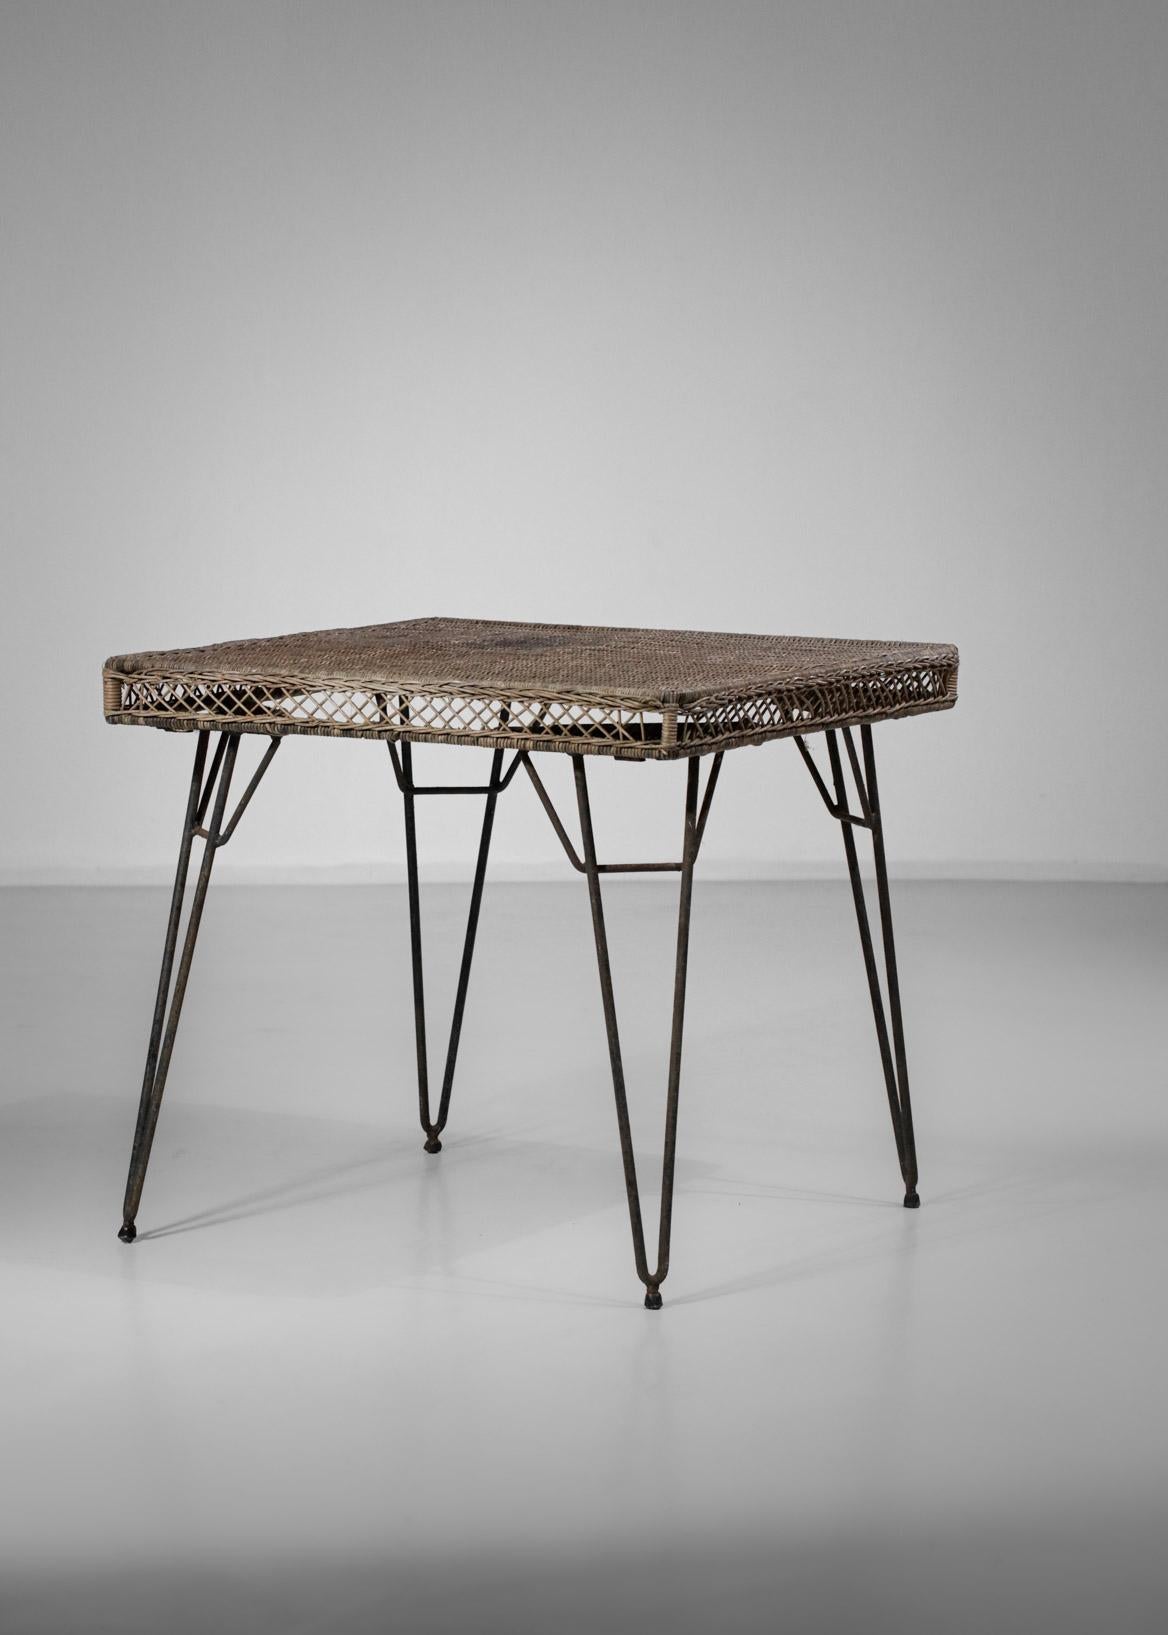 Square woven rattan table from the 1950s in the style of the work of French designer Mathieu Matégot. 